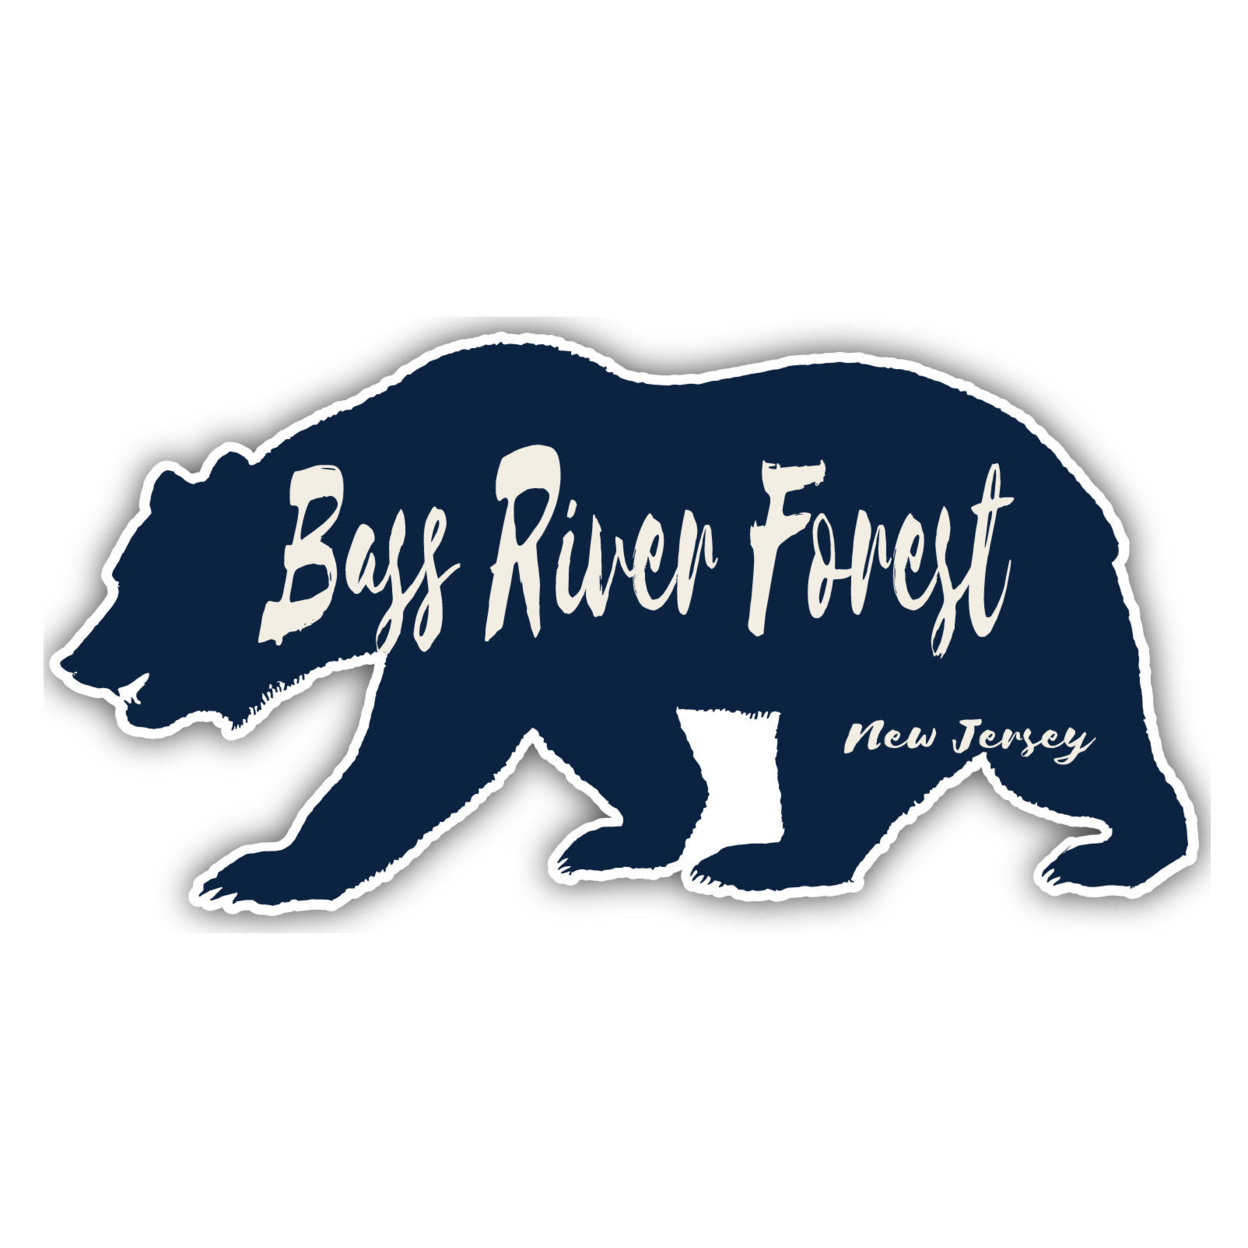 Bass River Forest New Jersey Souvenir Decorative Stickers (Choose Theme And Size) - Single Unit, 2-Inch, Bear